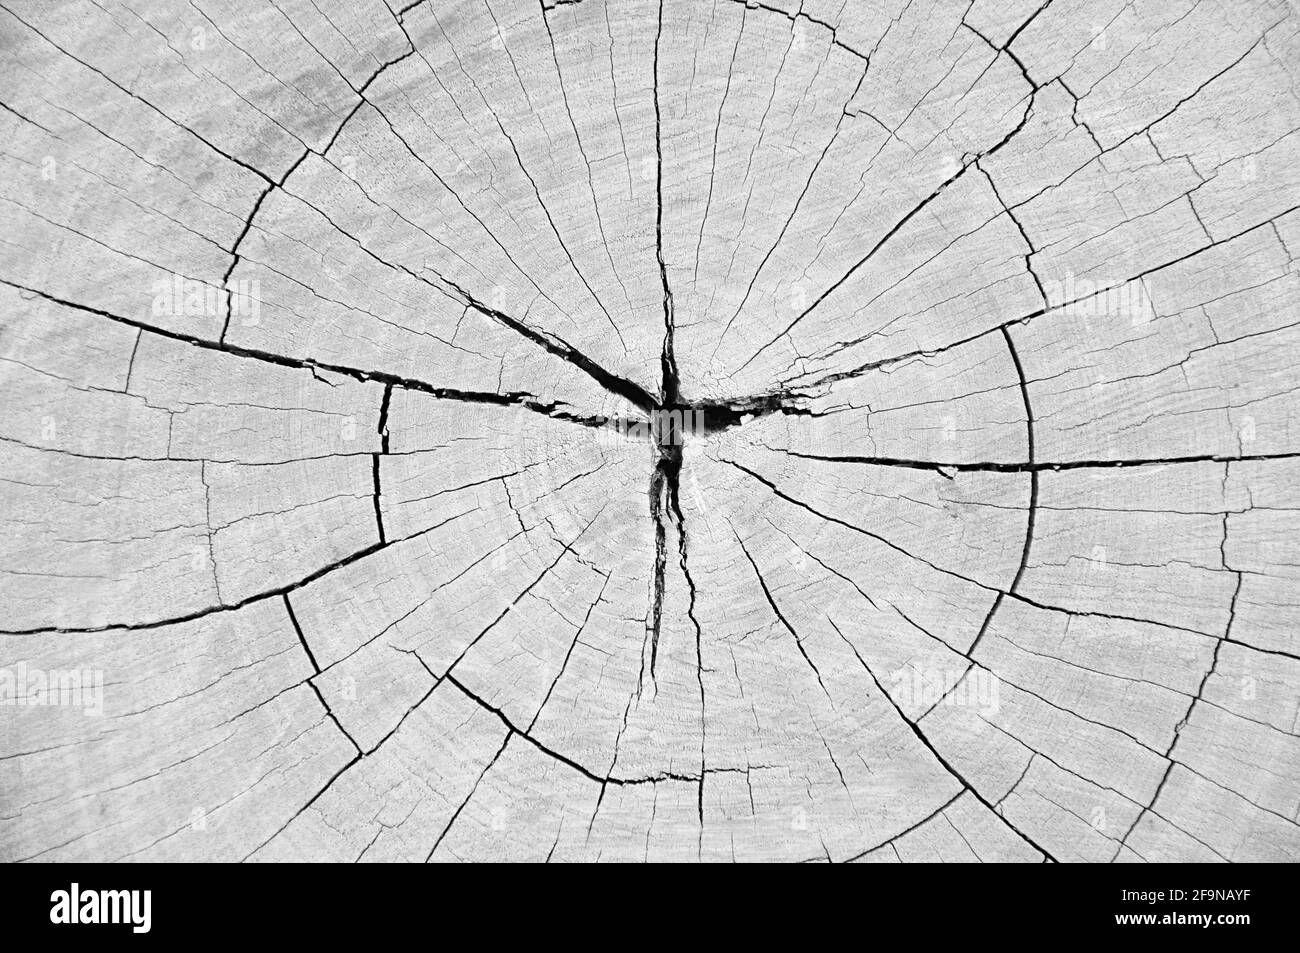 Dry old cracked tree stump with hole in the middle Stock Photo